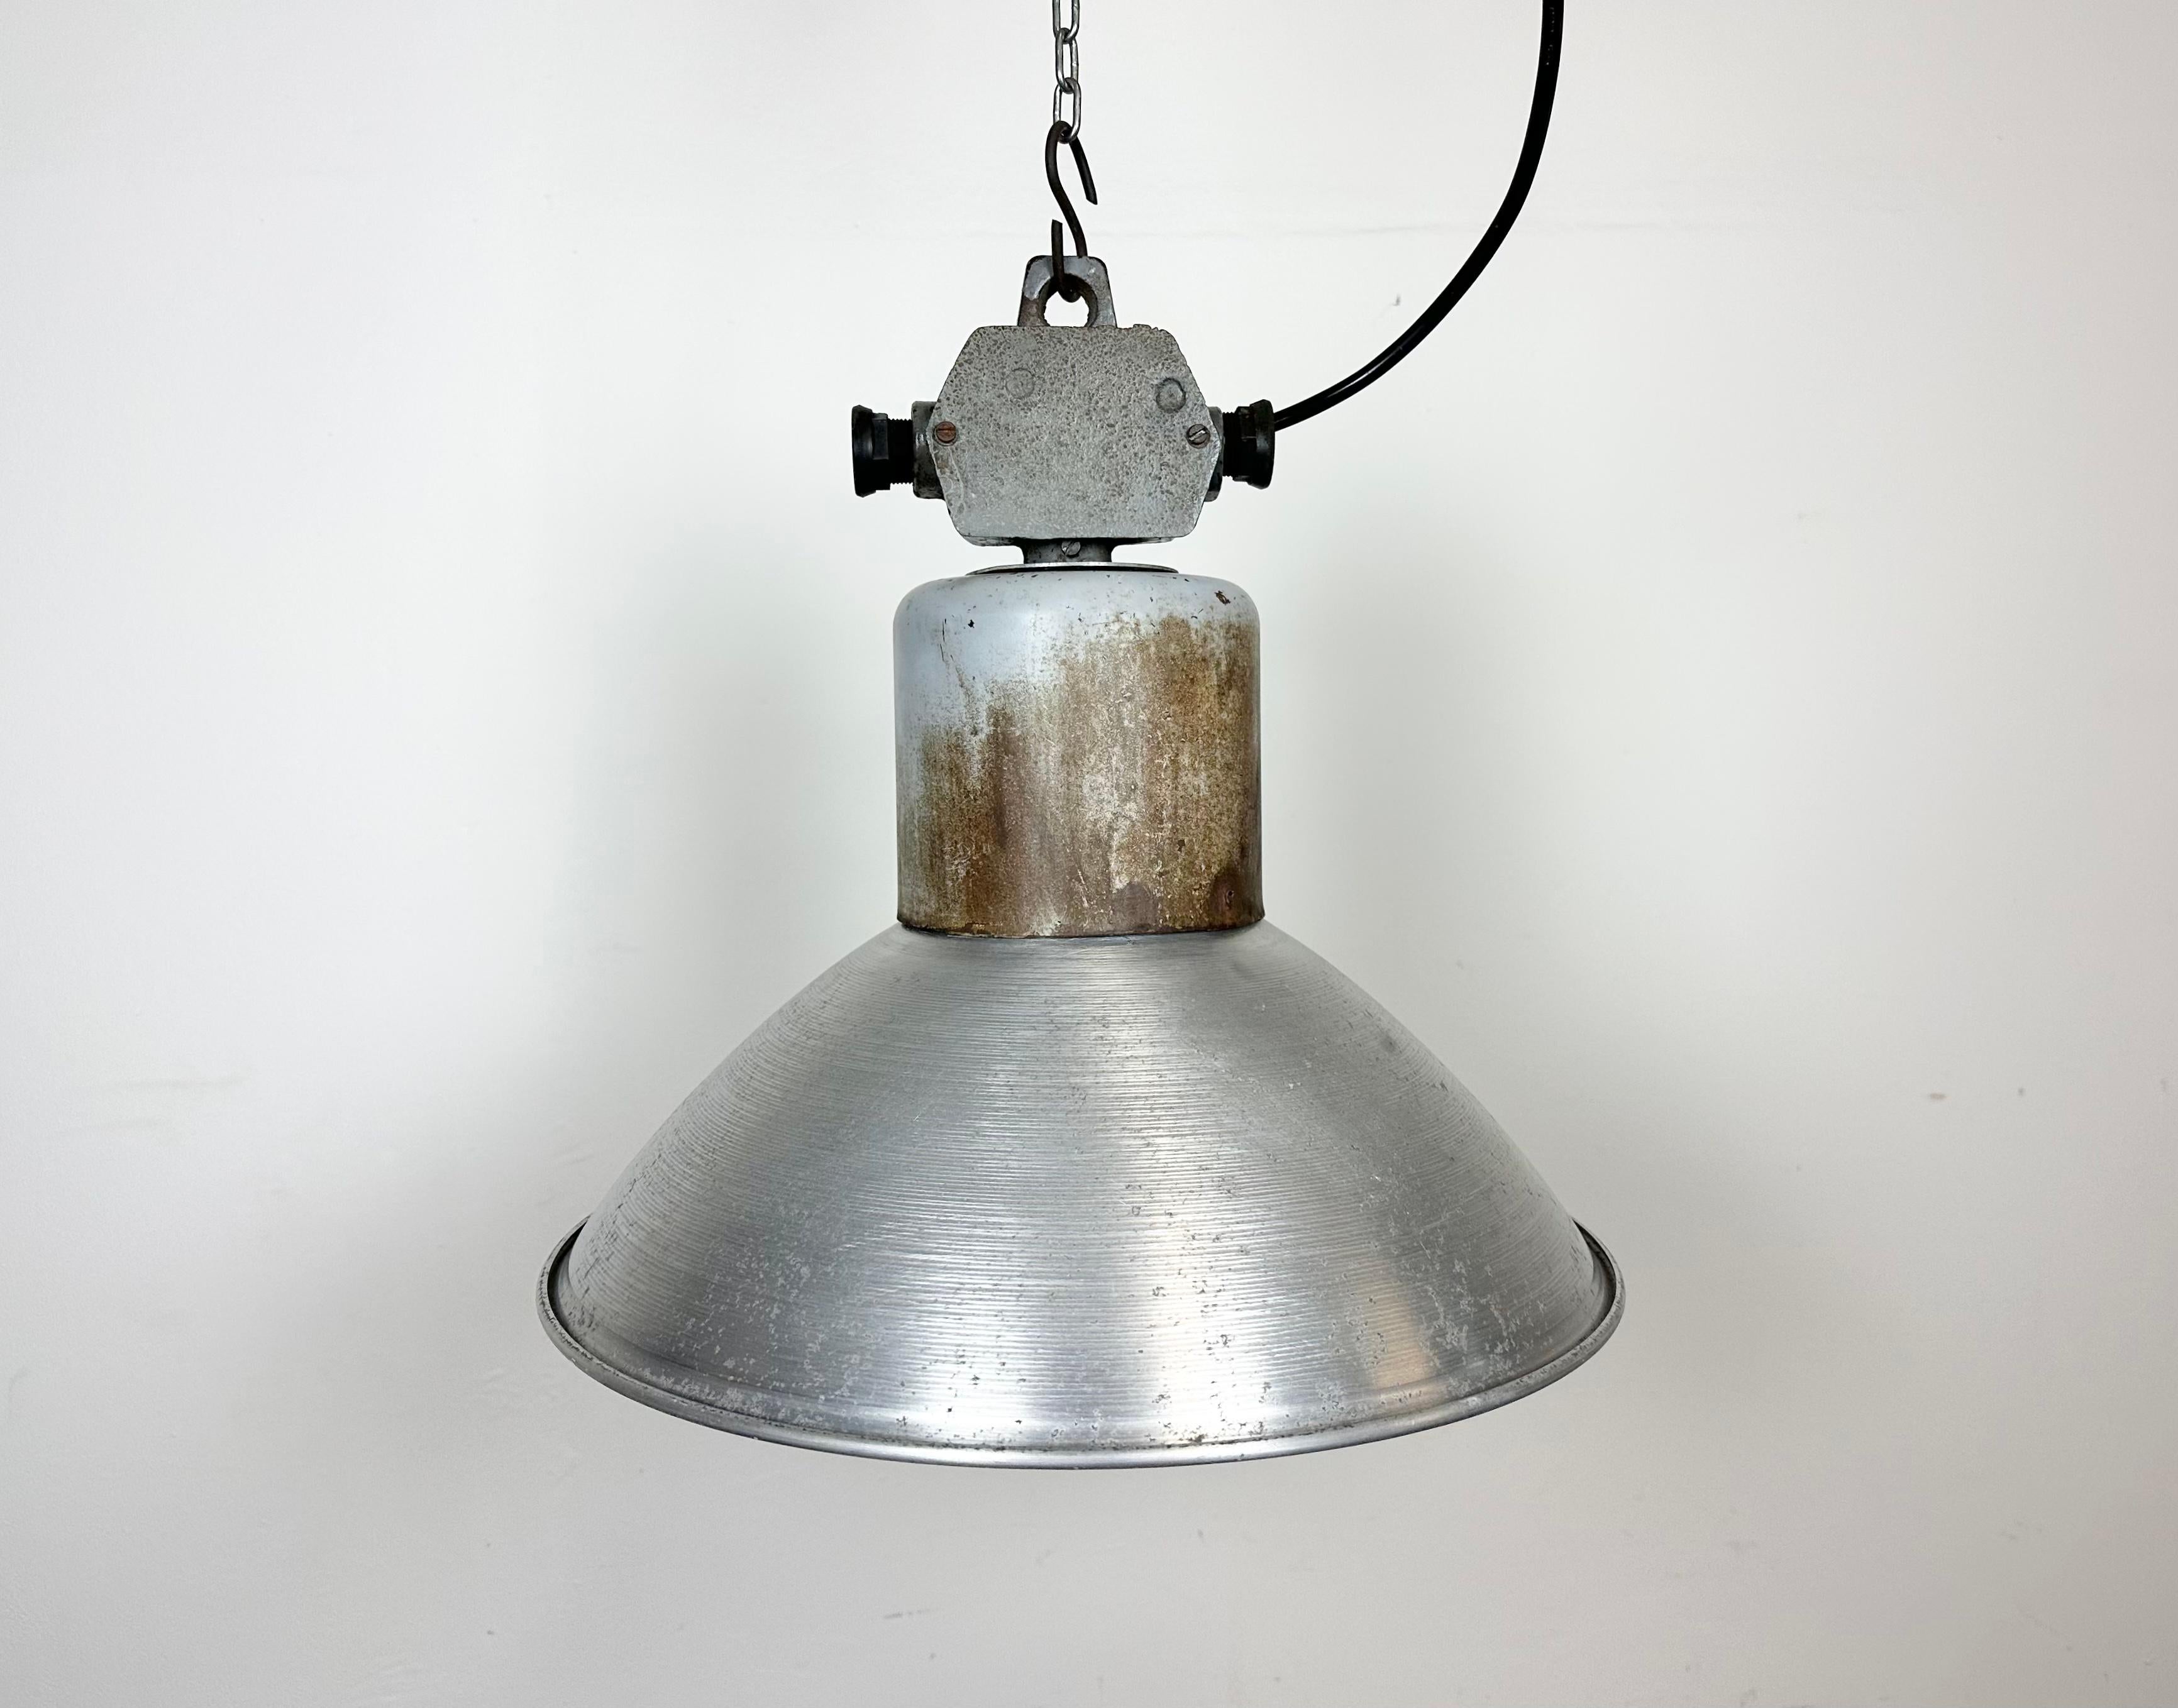 This industrial factory pendant lamp was made by Polam Wilkasy in Poland during the 1960s. It features an aluminium shade and iron top with cast aluminium box. New porcelain socket requires E27/ E26 light bulbs. New wire. The piece weighs 2.1 kg.The